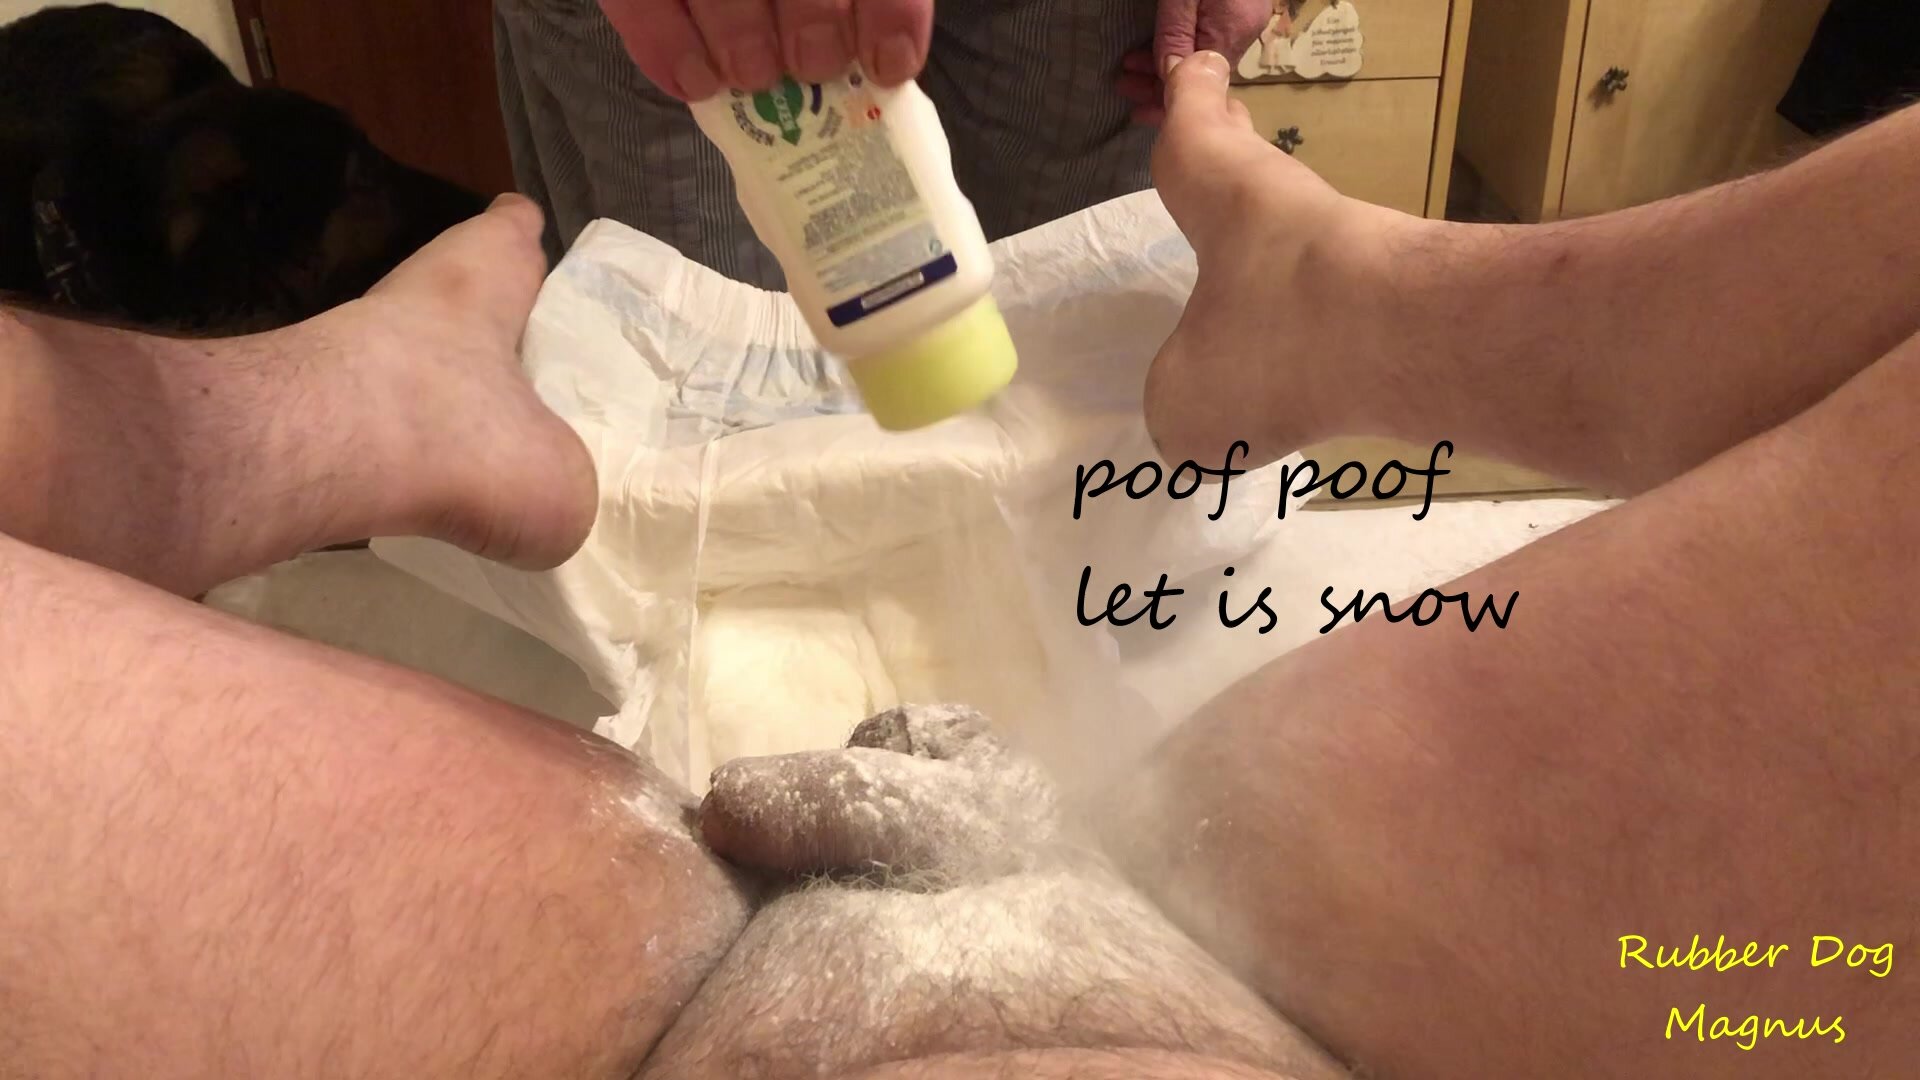 Daddy padding his boy [ABDL Roleplay]